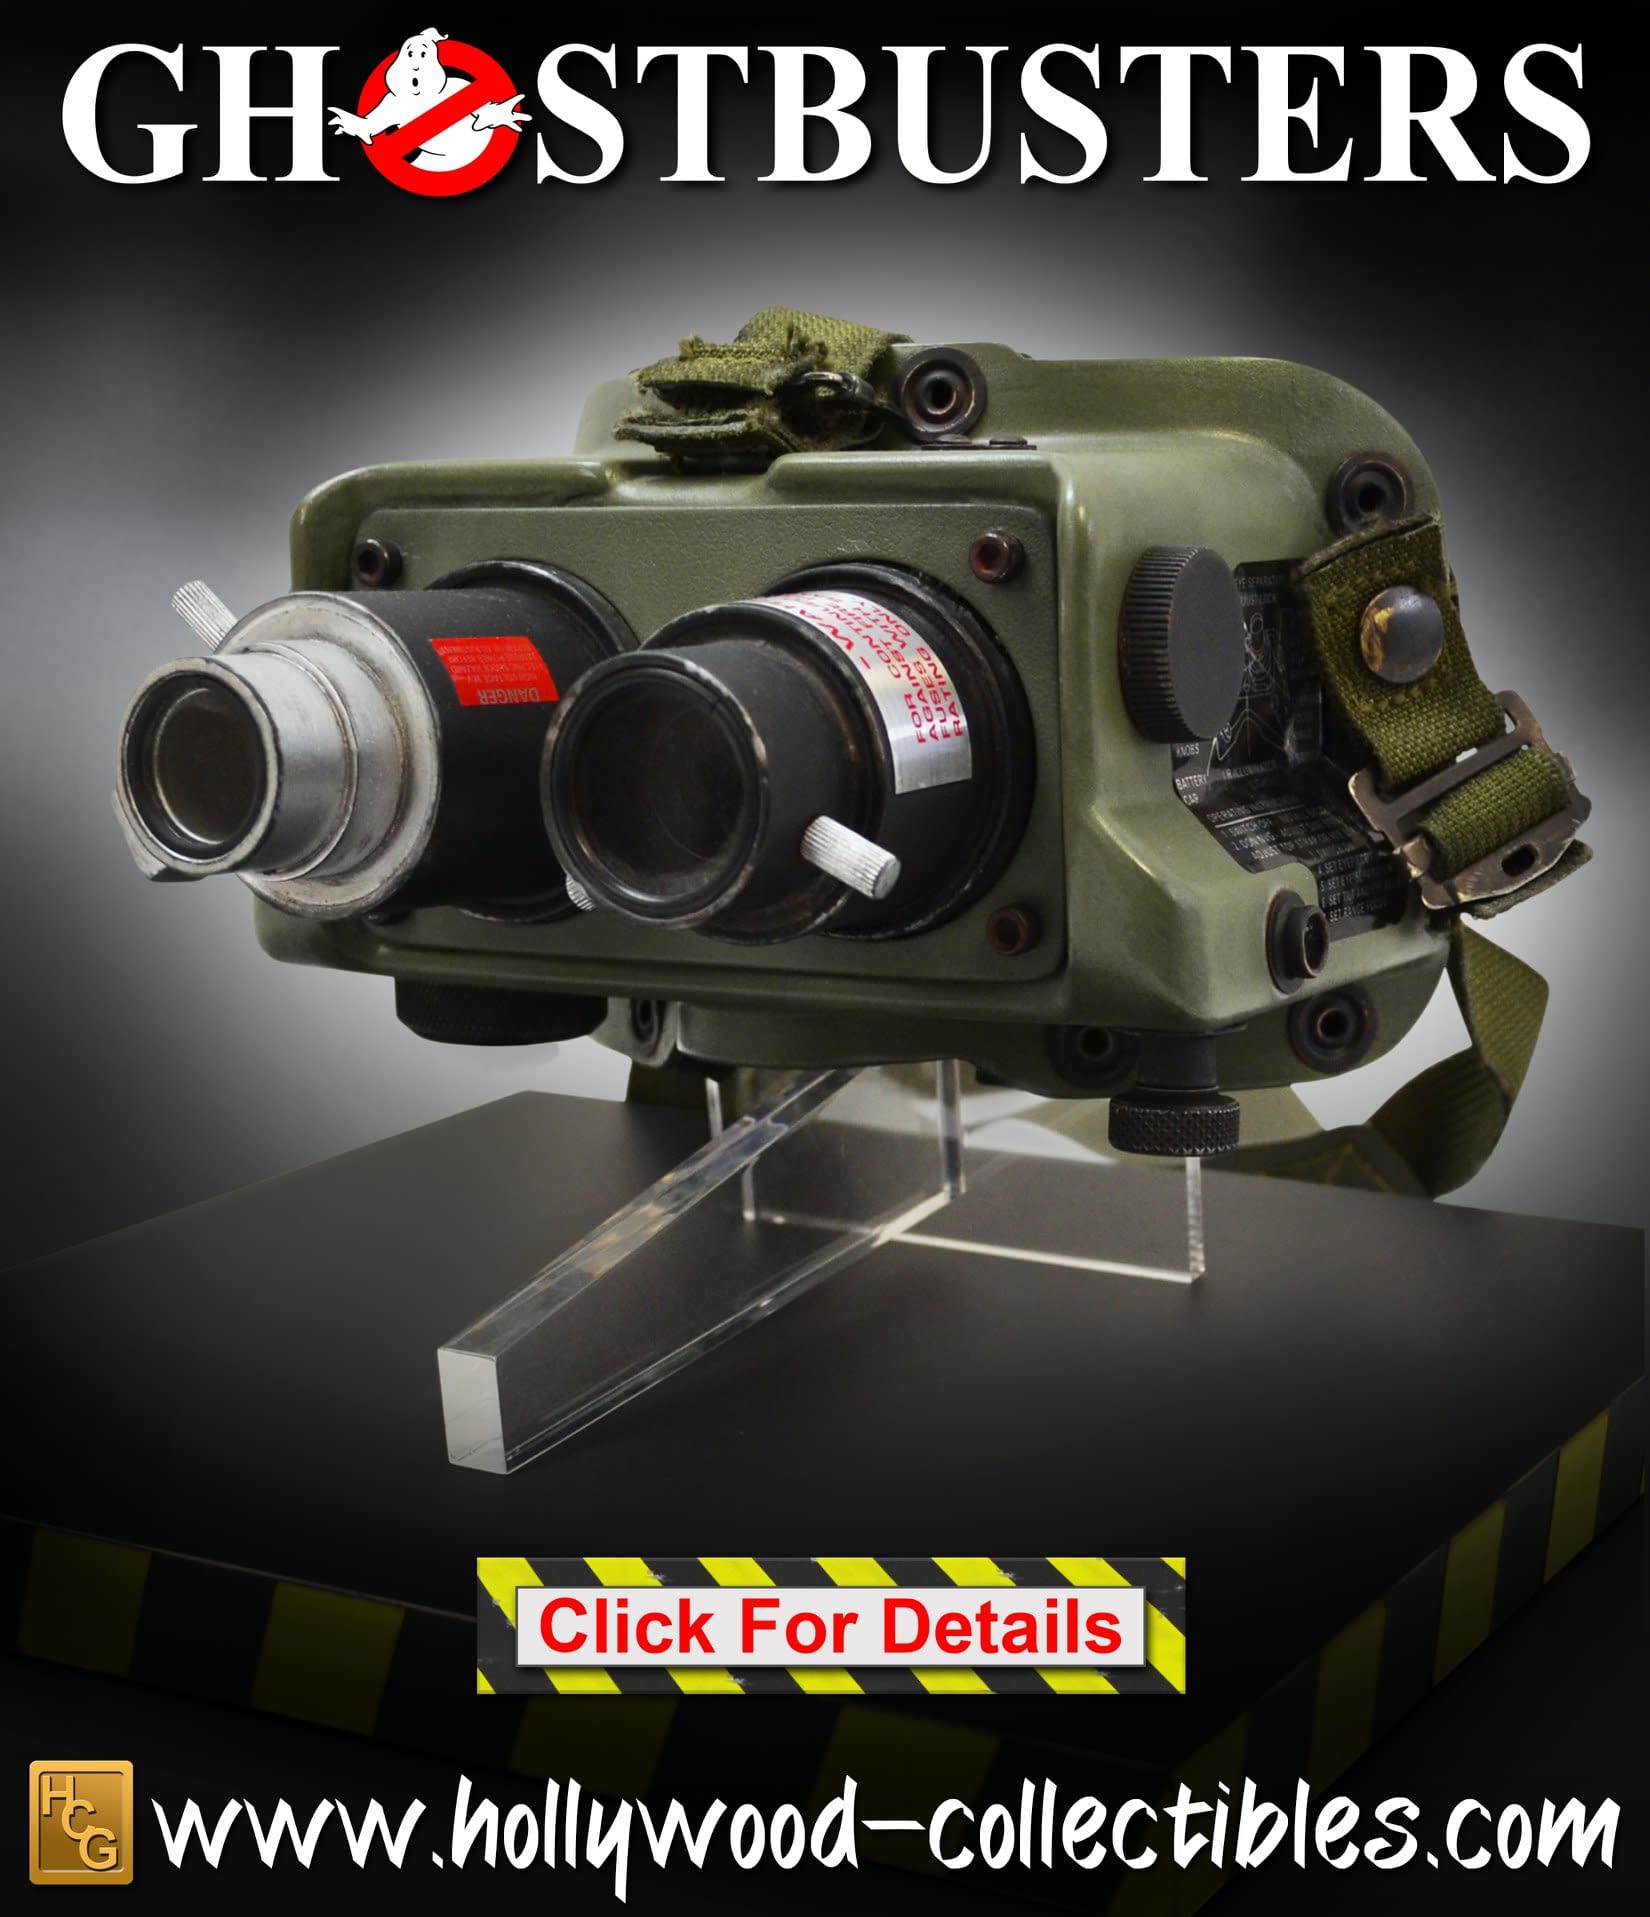 "Ghostbusters" and Hollywood Collectibles Want You to Hunt Ghosts